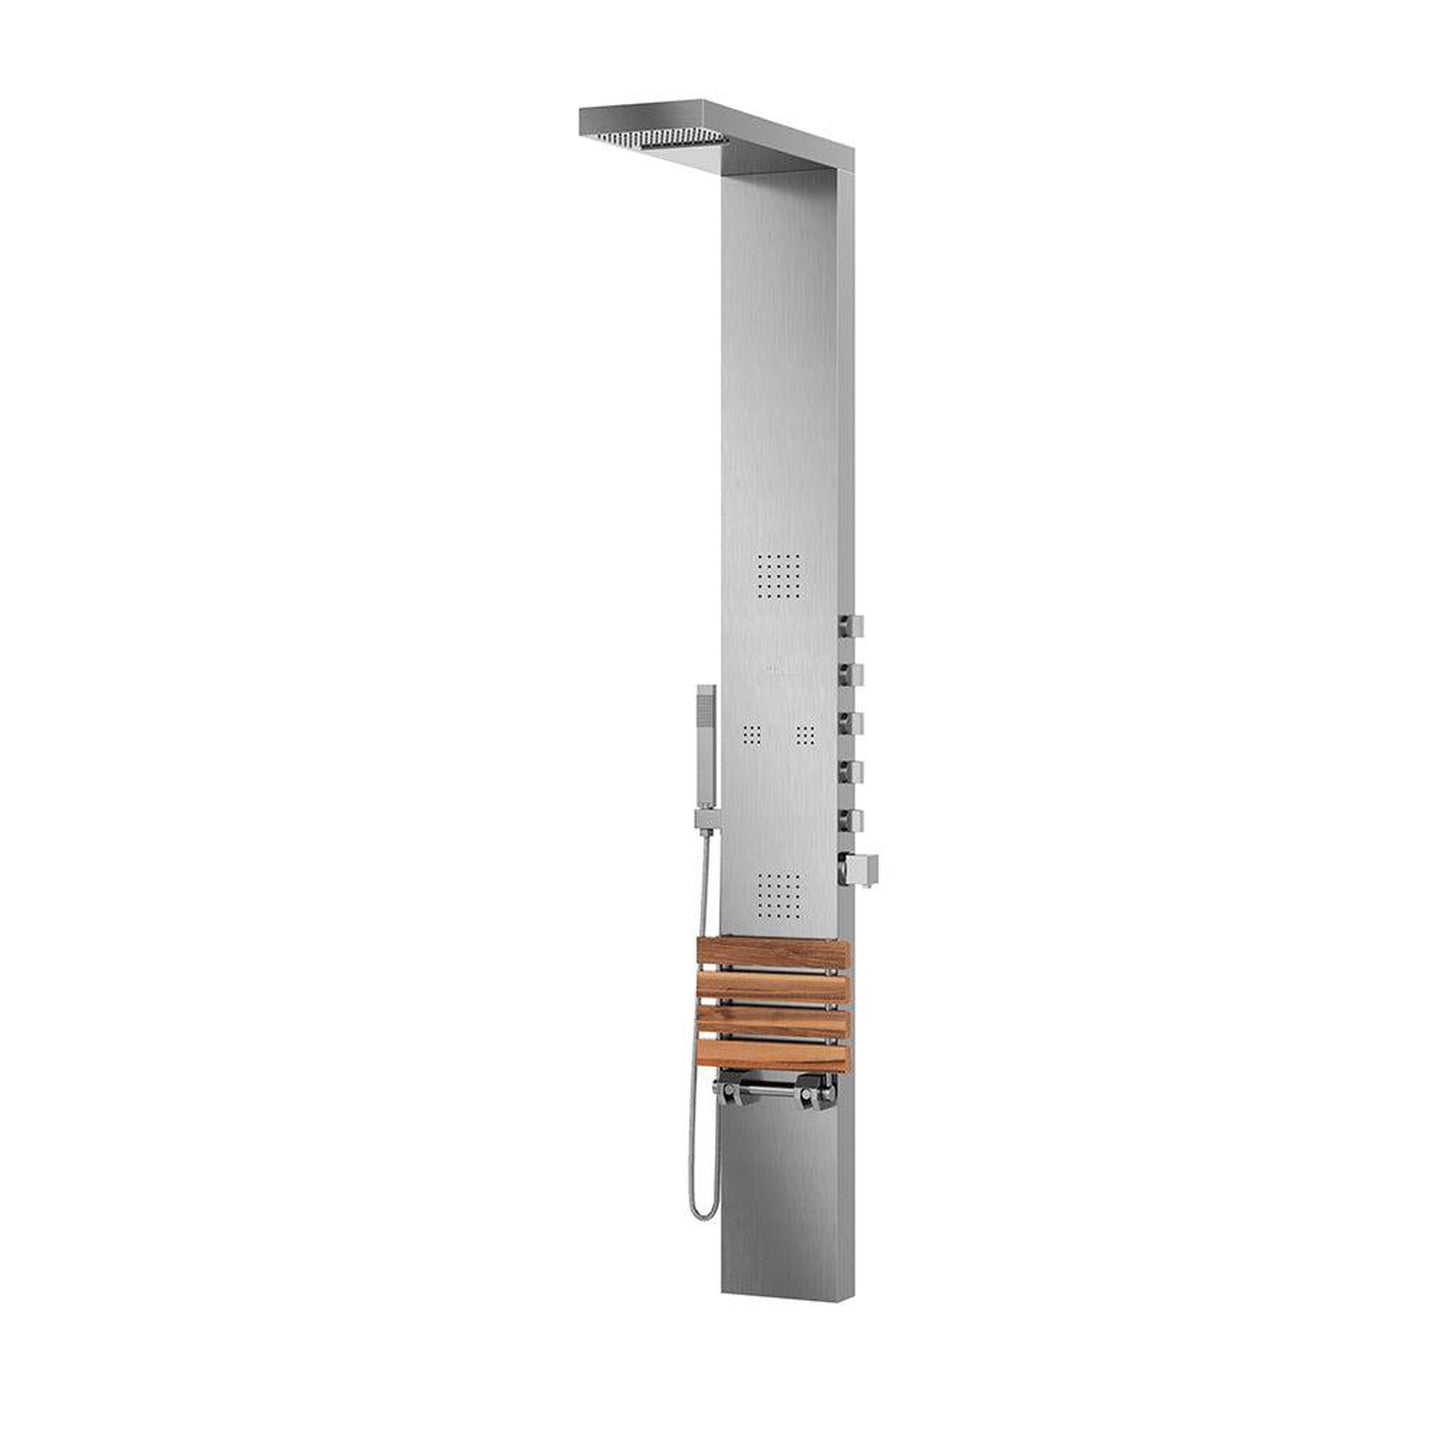 PULSE ShowerSpas Oahu 76" Multi Function Shower Panel in Brushed Stainless Steel Finish With Integrated Teak Wood Folding Seat, 4 Rejuvenating Body Jets and Hand Shower